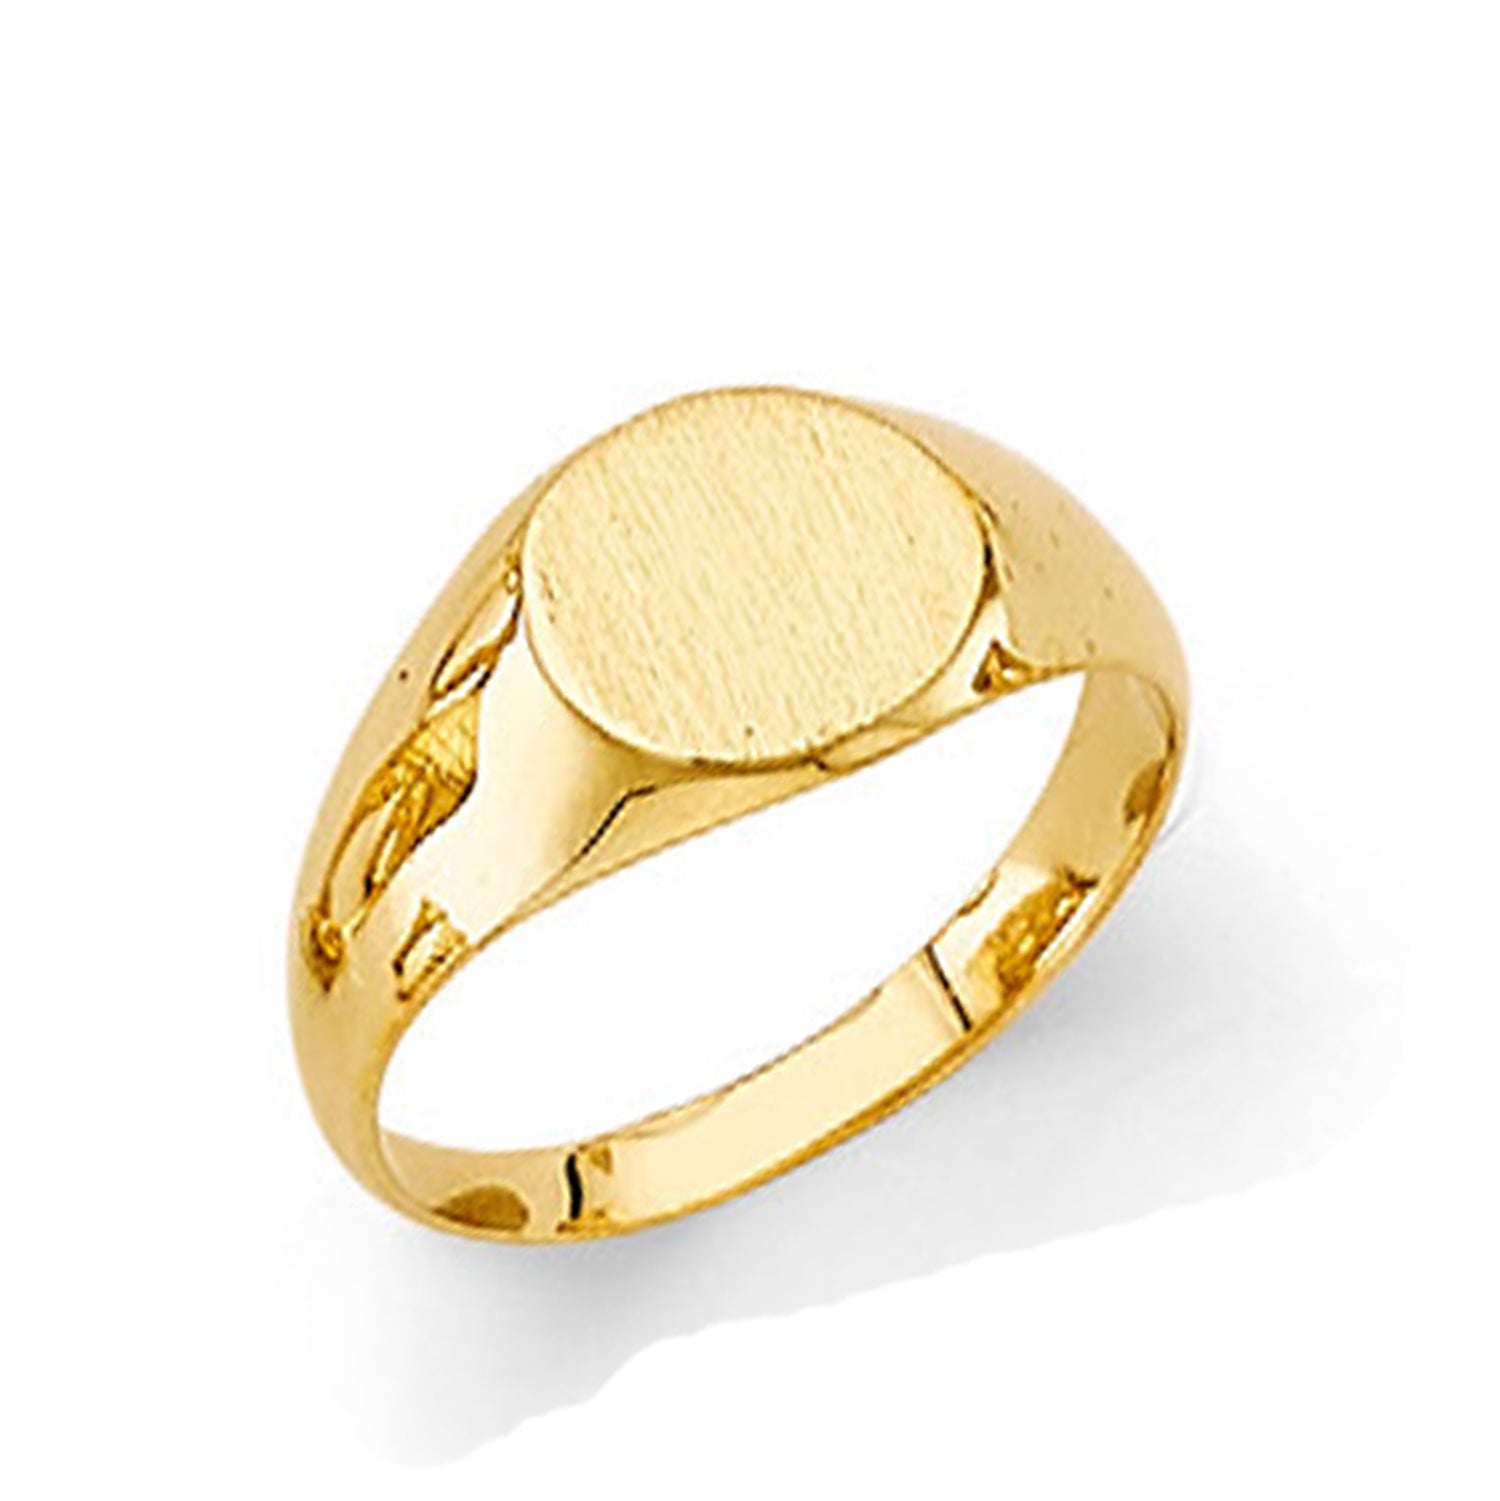 Oval-shaped Casting Ring in Solid Gold 